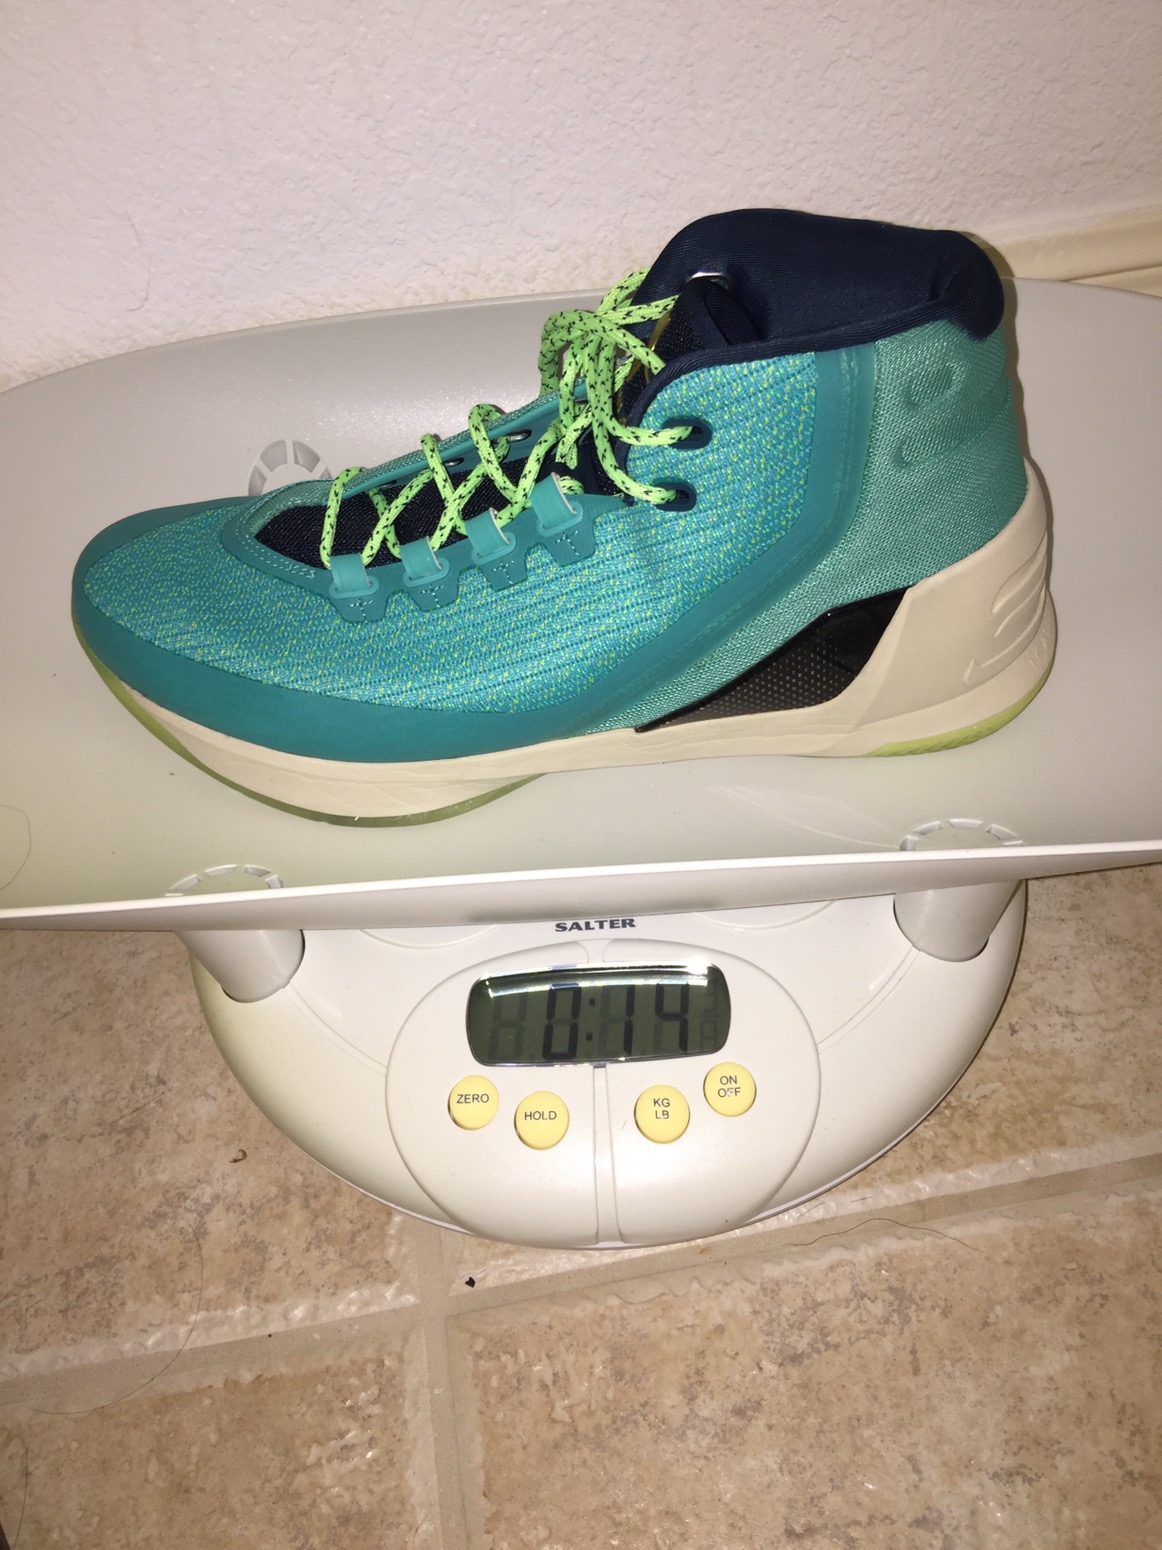 curry 3 zero review